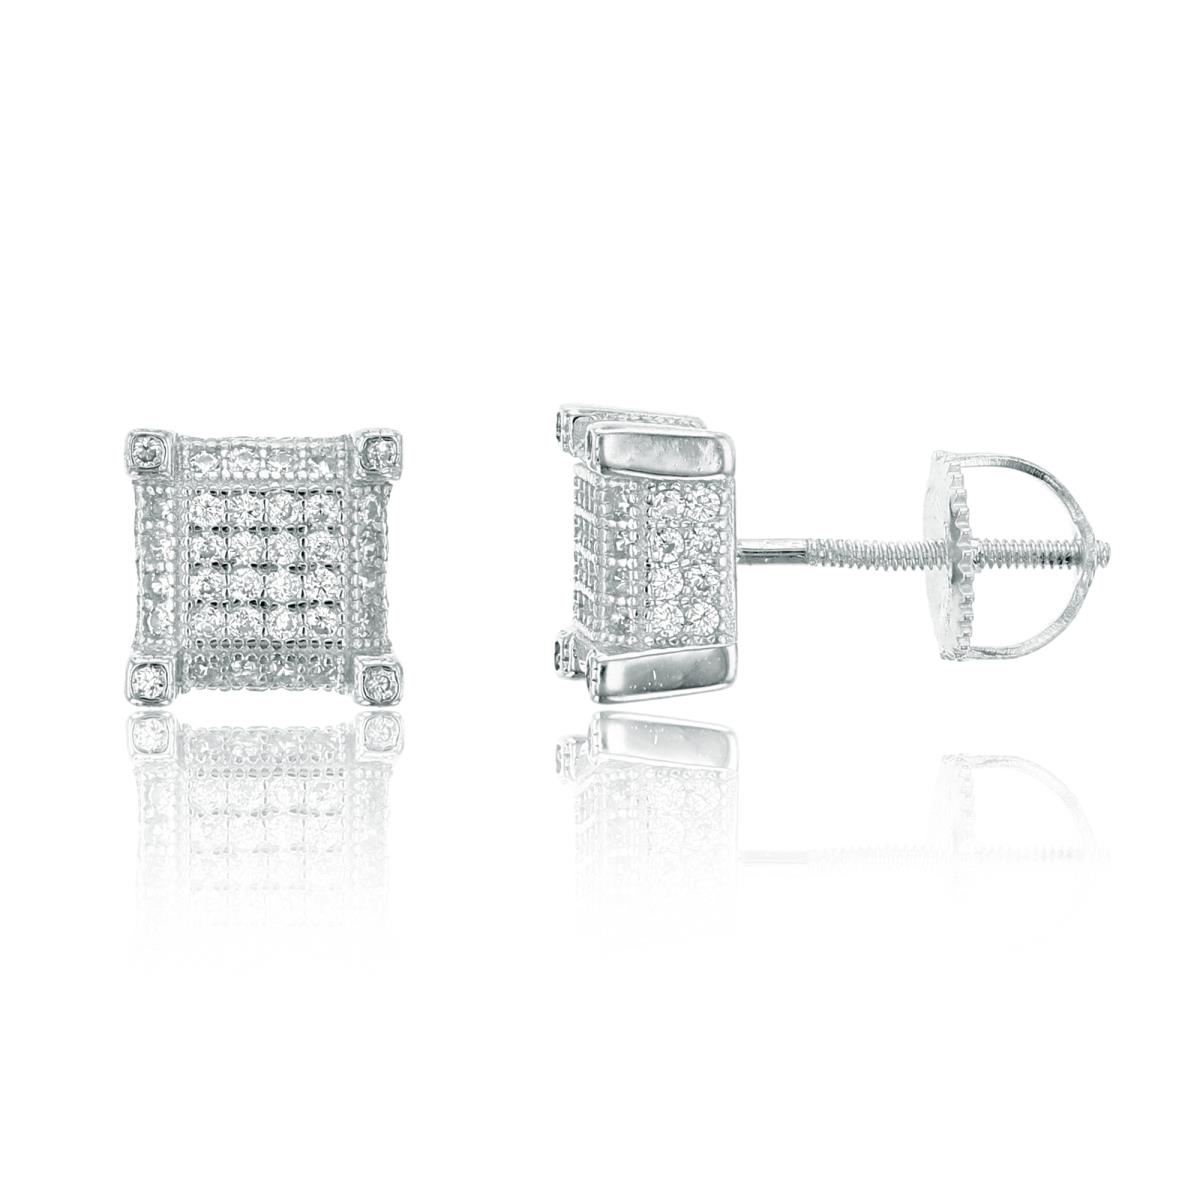 Sterling Silver 8x8mm 3D Square Micropave Screwback Stud Earring